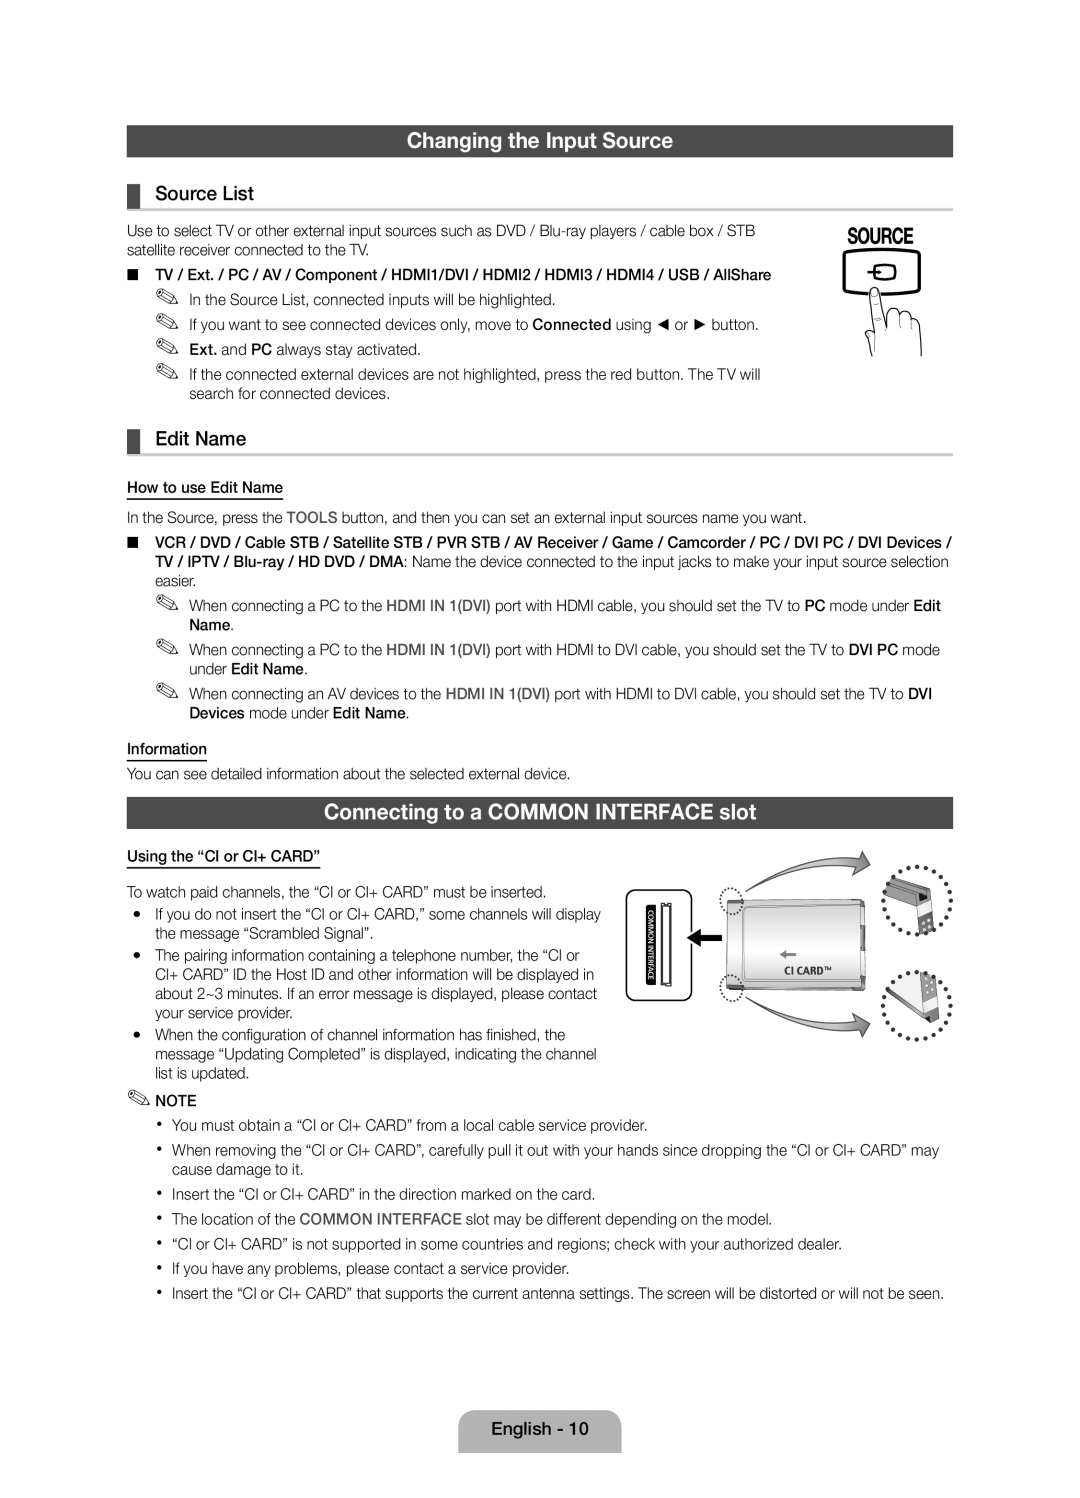 Samsung Series 5 user manual Changing the Input Source, Connecting to a COMMON INTERFACE slot, Source List, Edit Name 